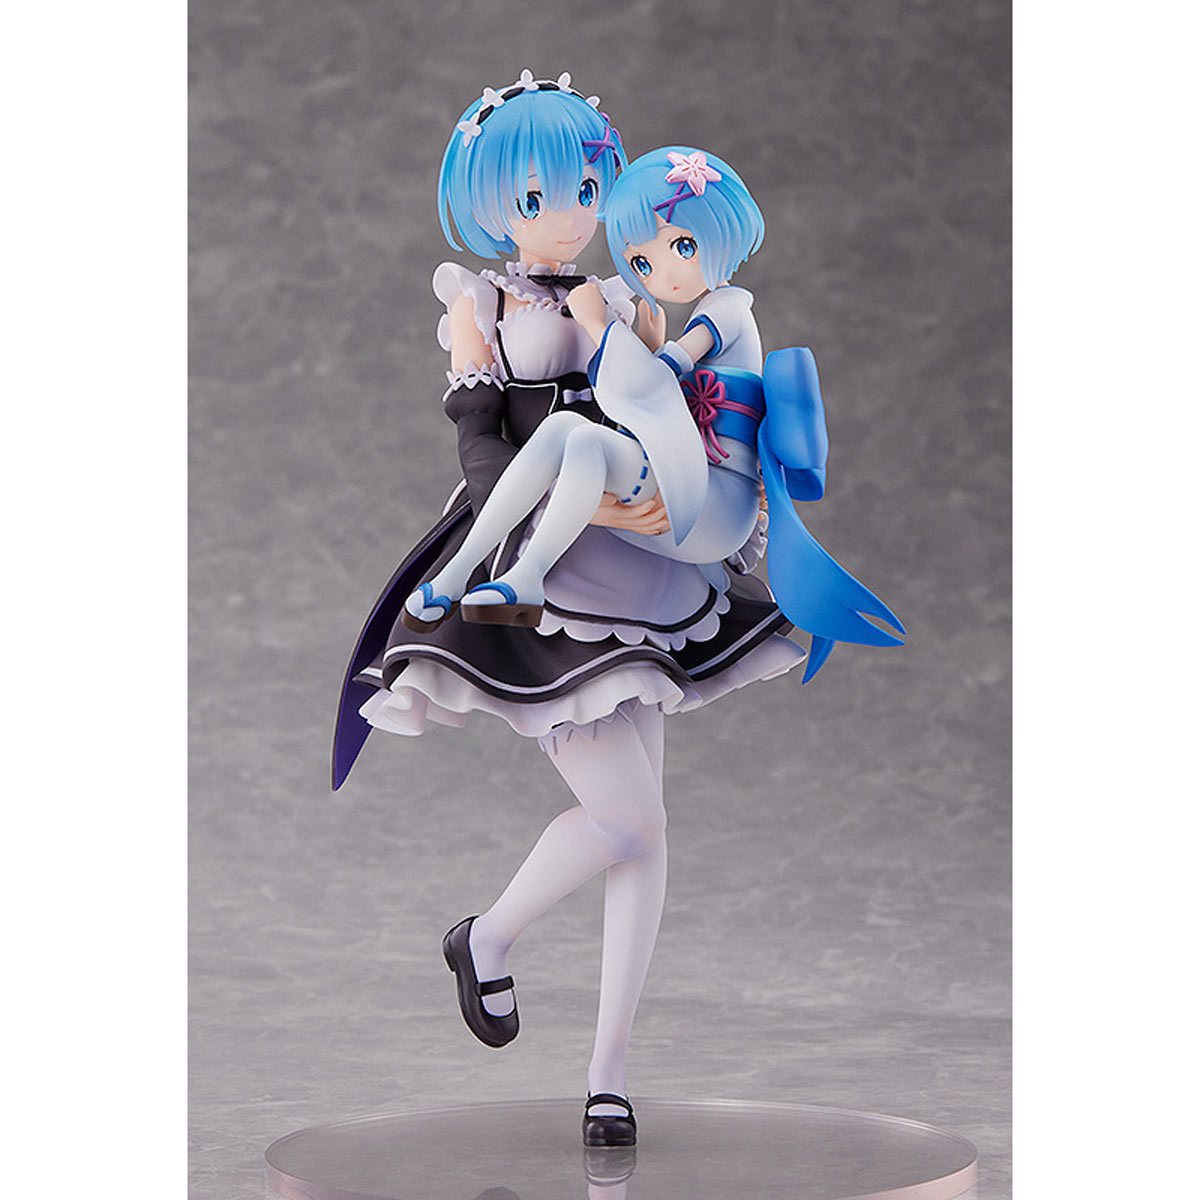 Re:Zero - Starting Life in Another World - Rem and Childhood Rem 1/7th Scale Figure Sega